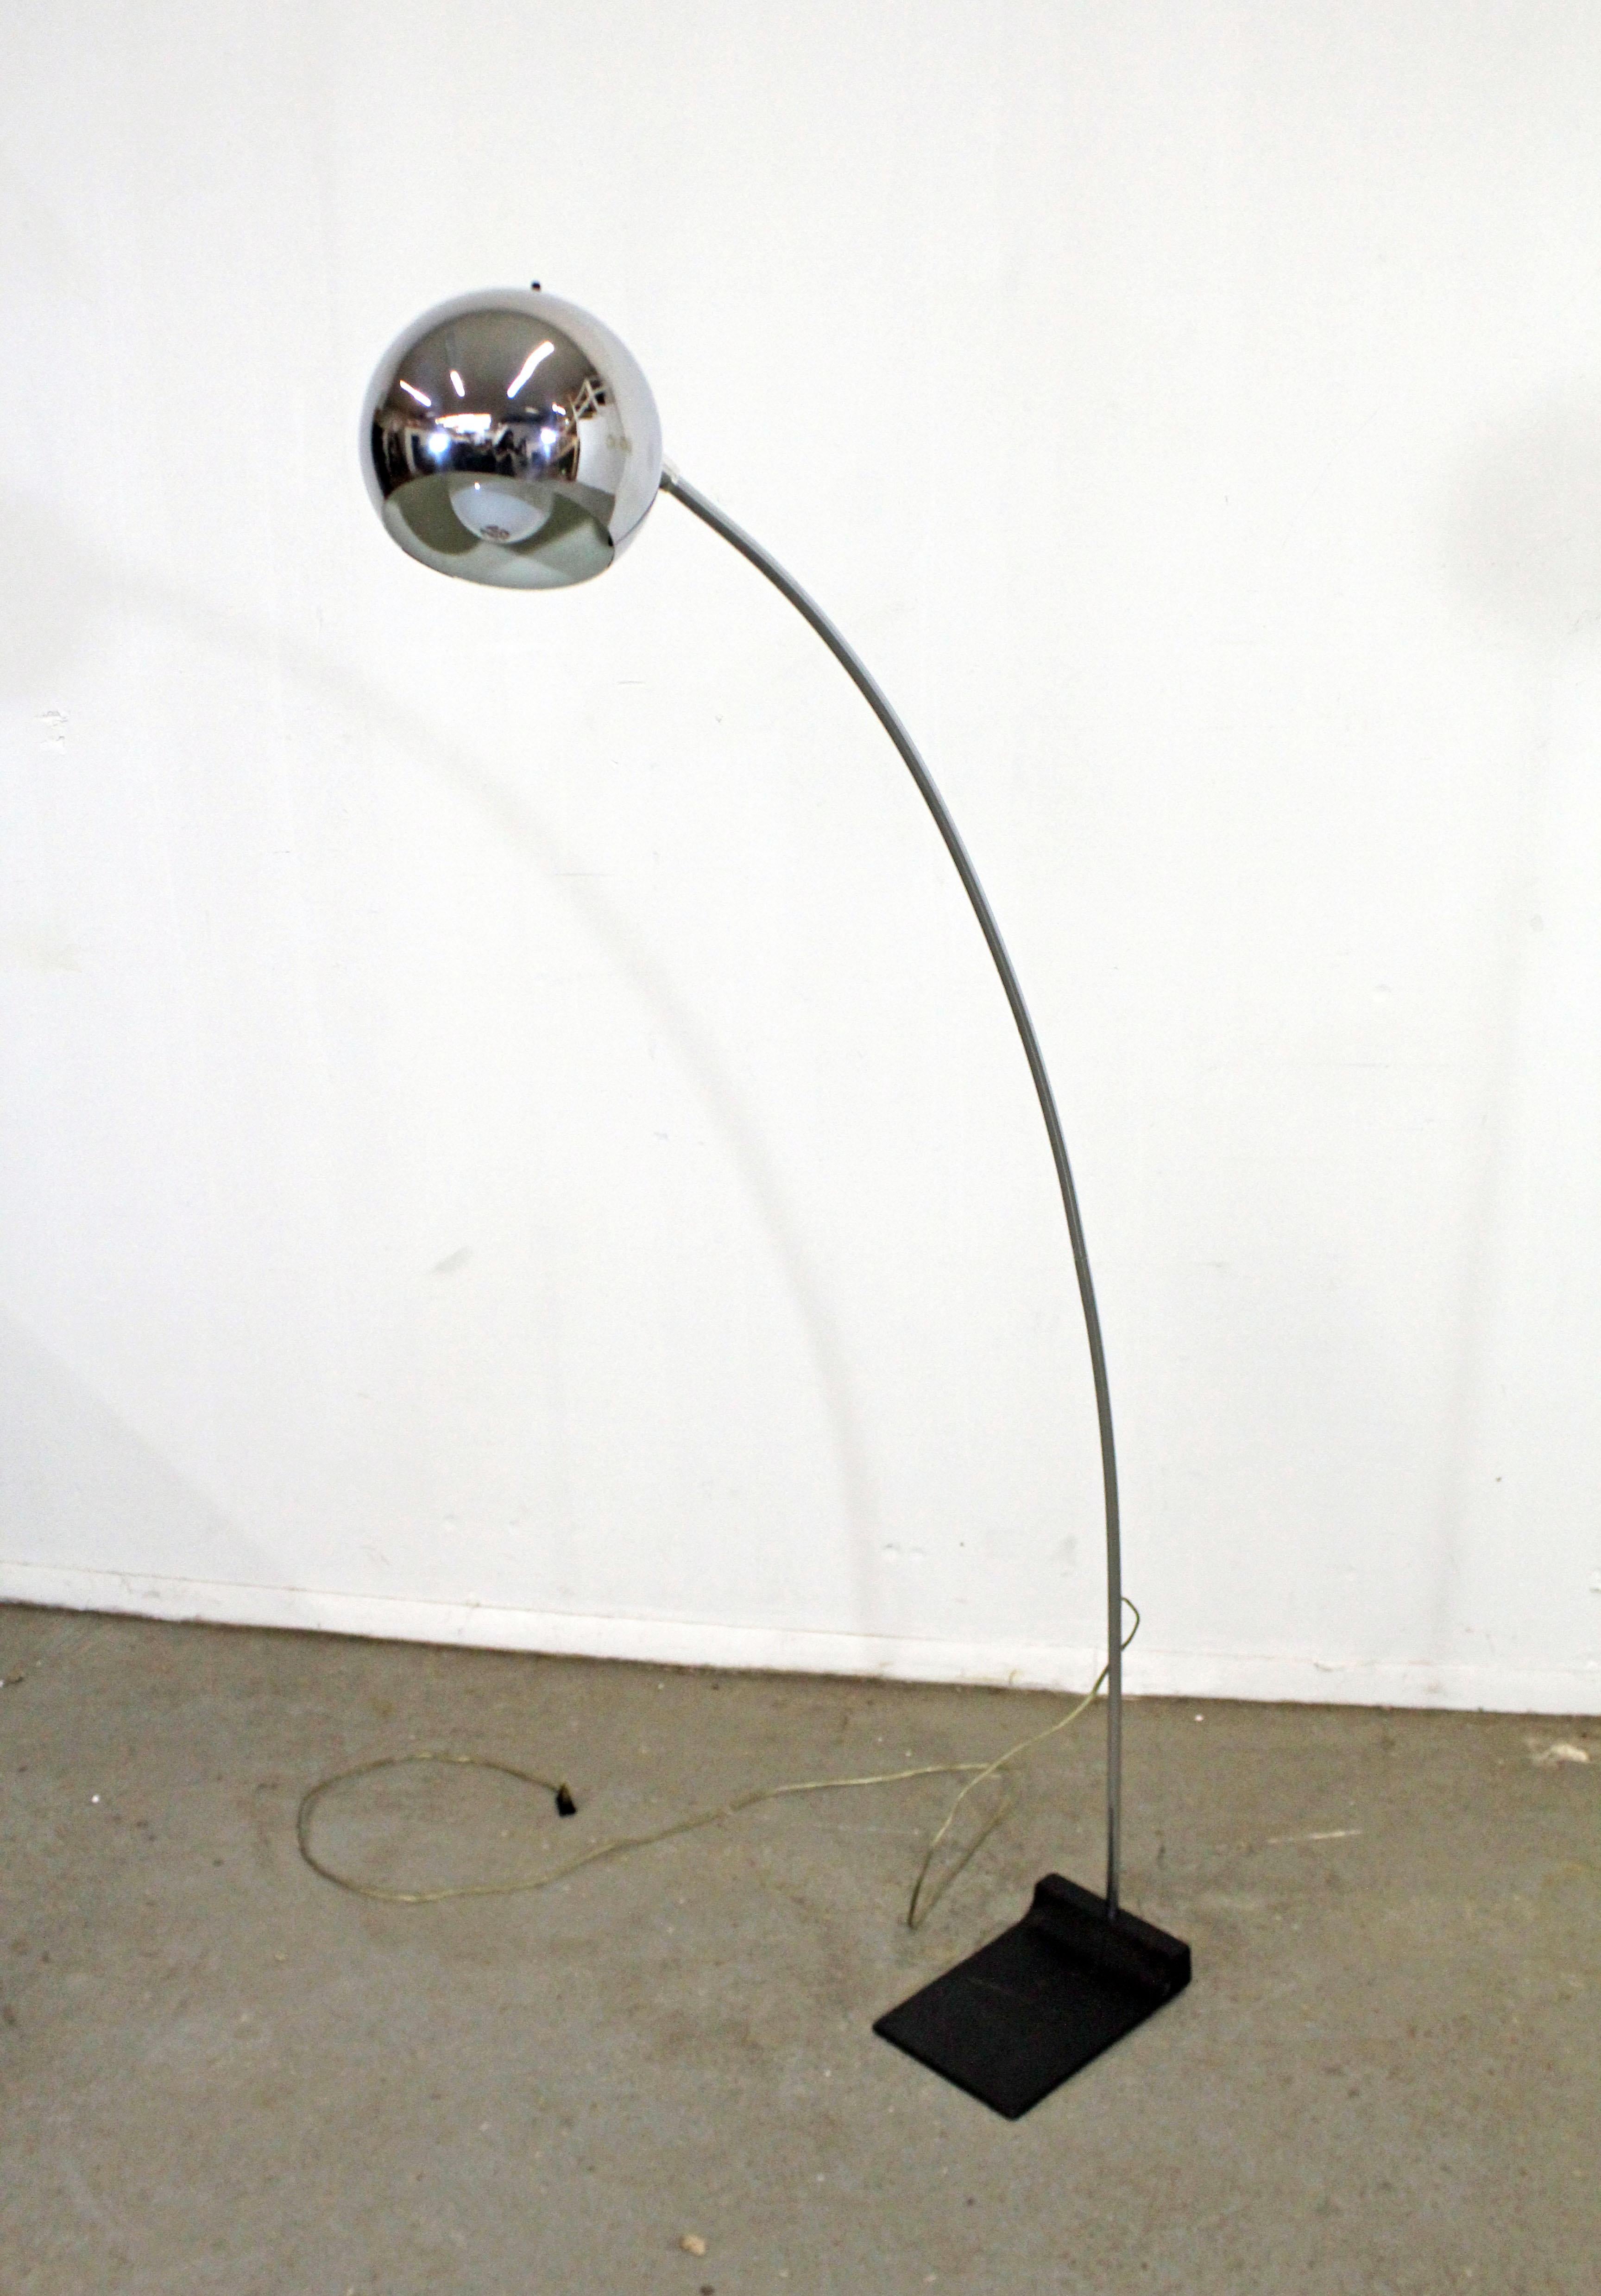 Offered is a beautiful Mid-Century Modern vintage arc floor lamp. The lamp is made of chrome and has a steel base. Features an adjustable head and arced stand that comes apart. It is in good vintage condition, has been tested and works. Shows some